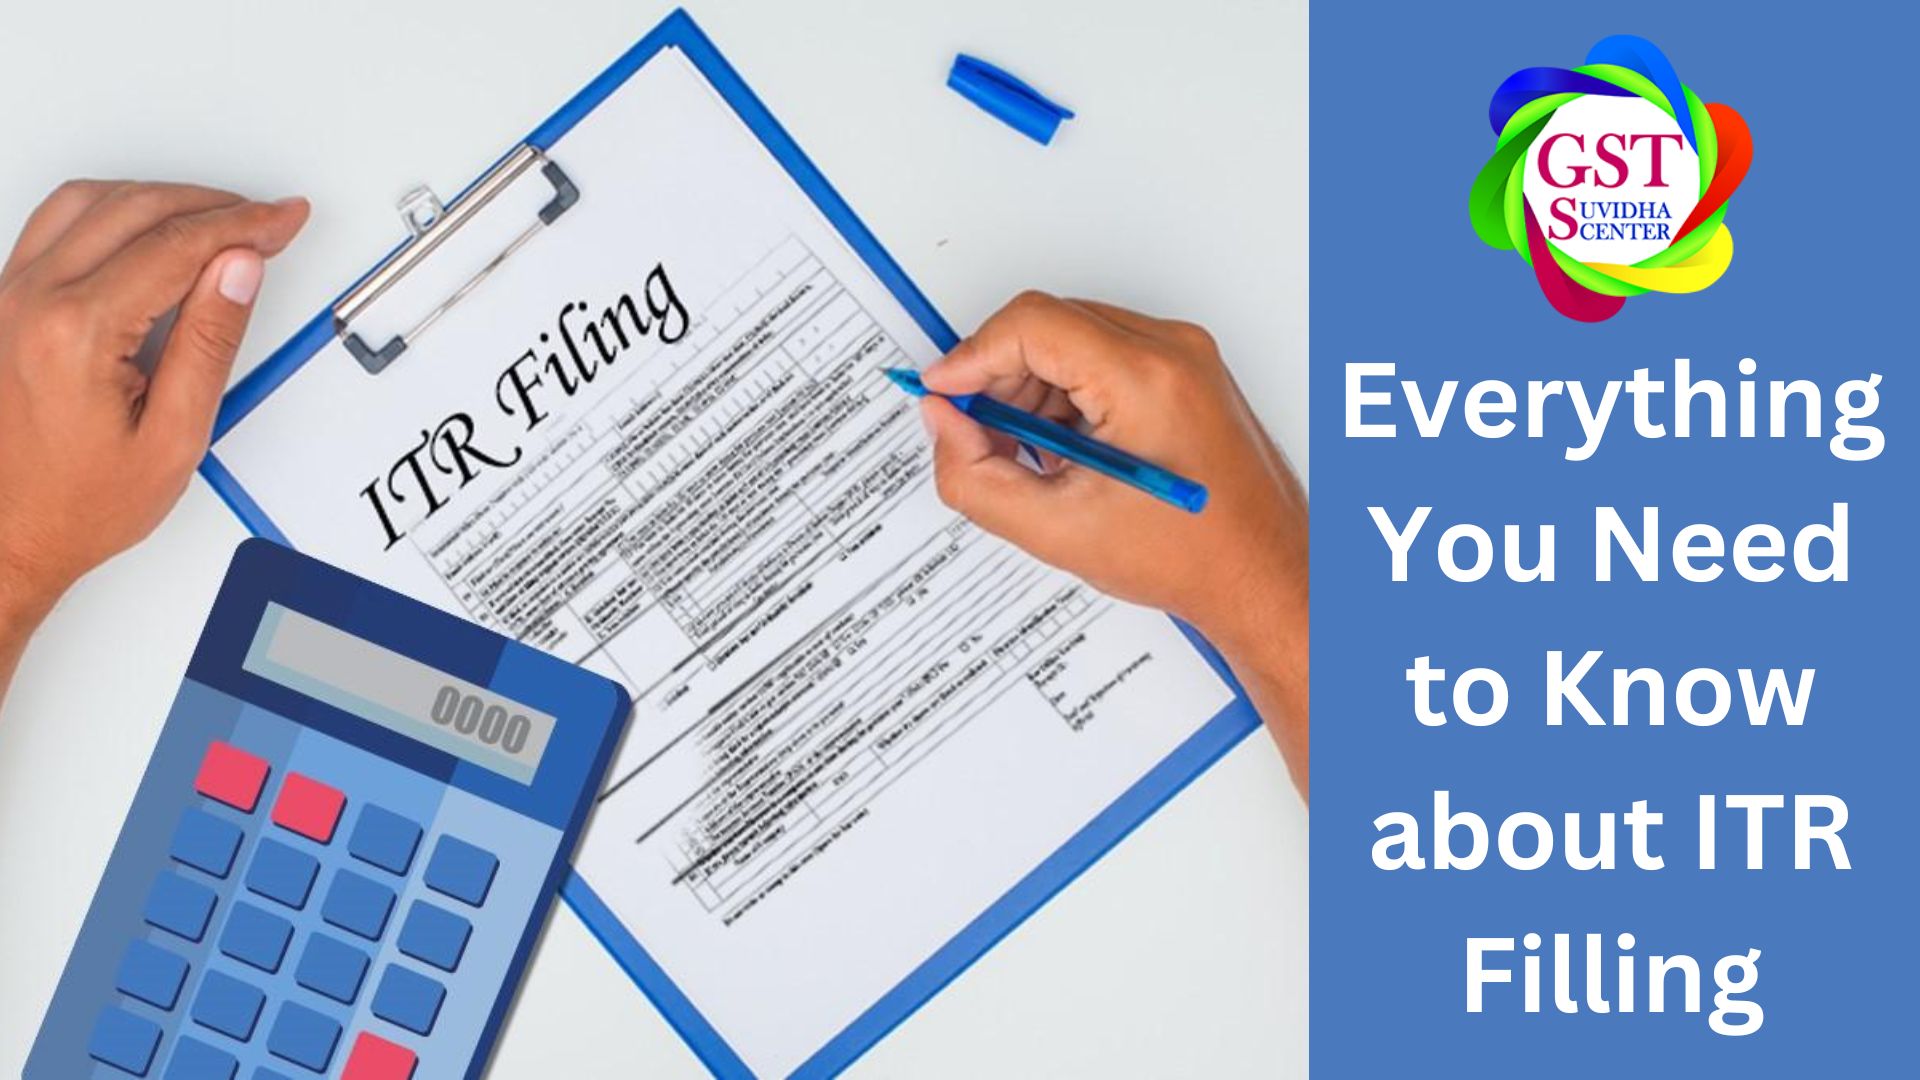 Everything You Need to Know about ITR Filling